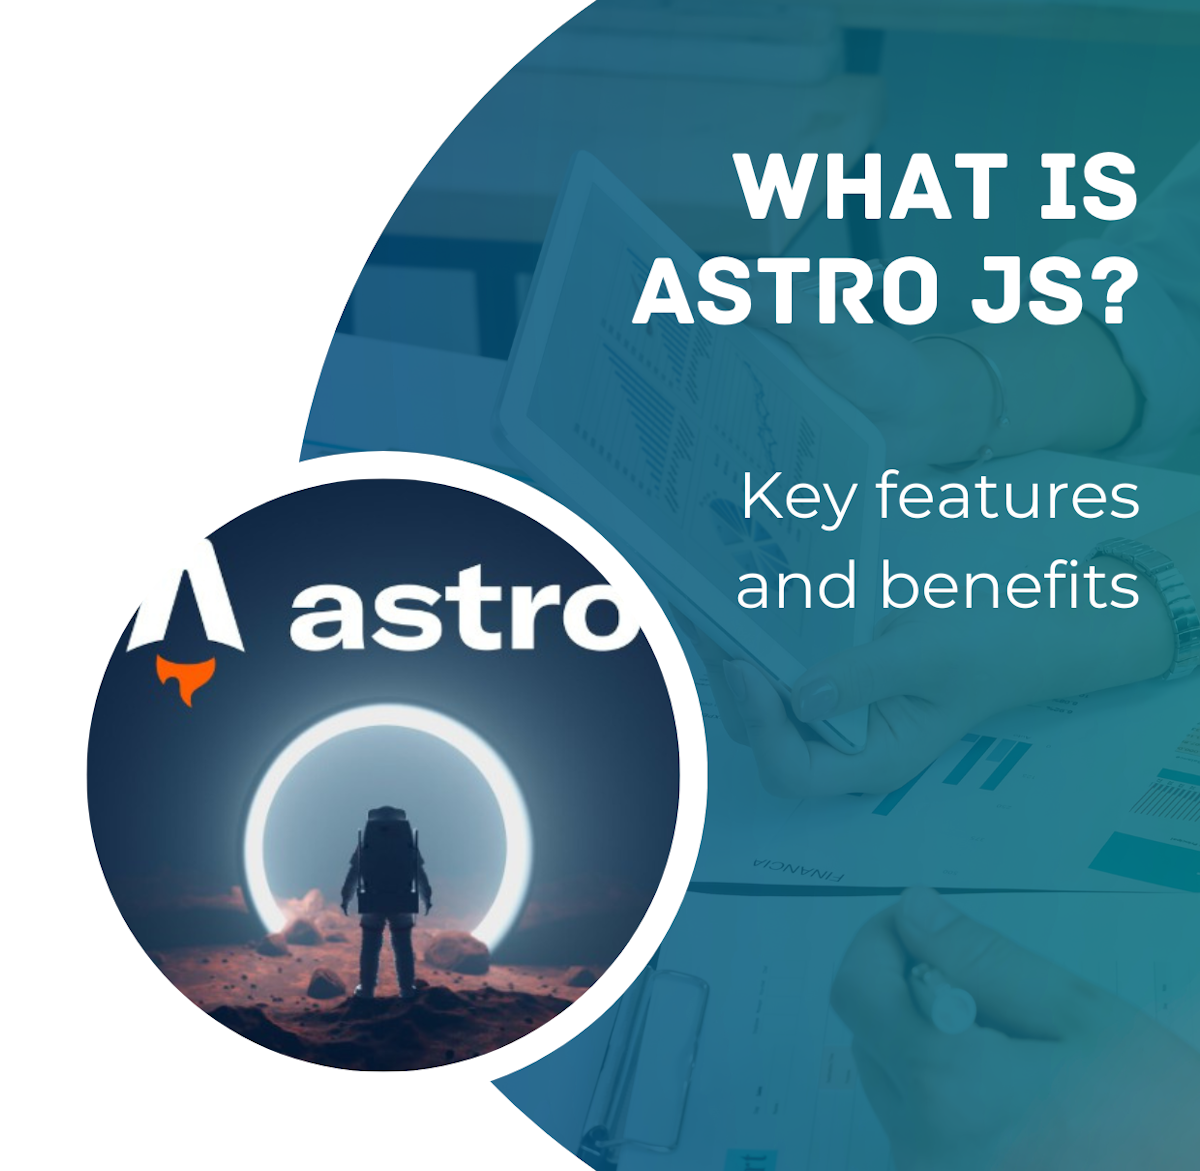 What is Astro js